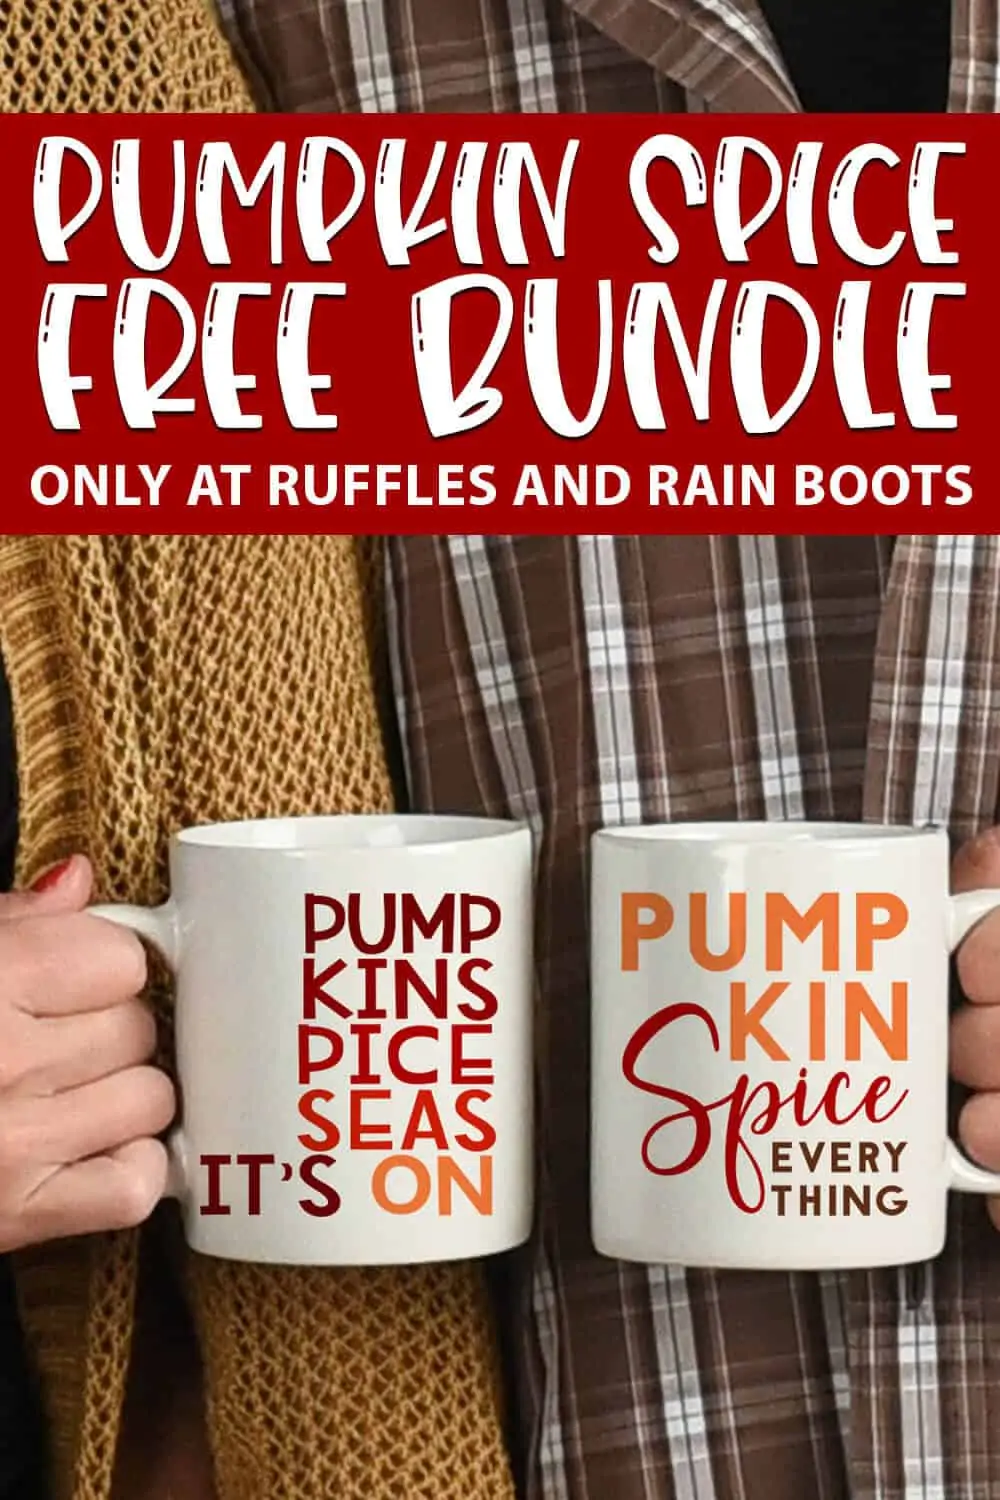 Pumpkin Spice cut file bundle of free cut files for cricut or silhouette with text which reads pumpkin spice free bundle